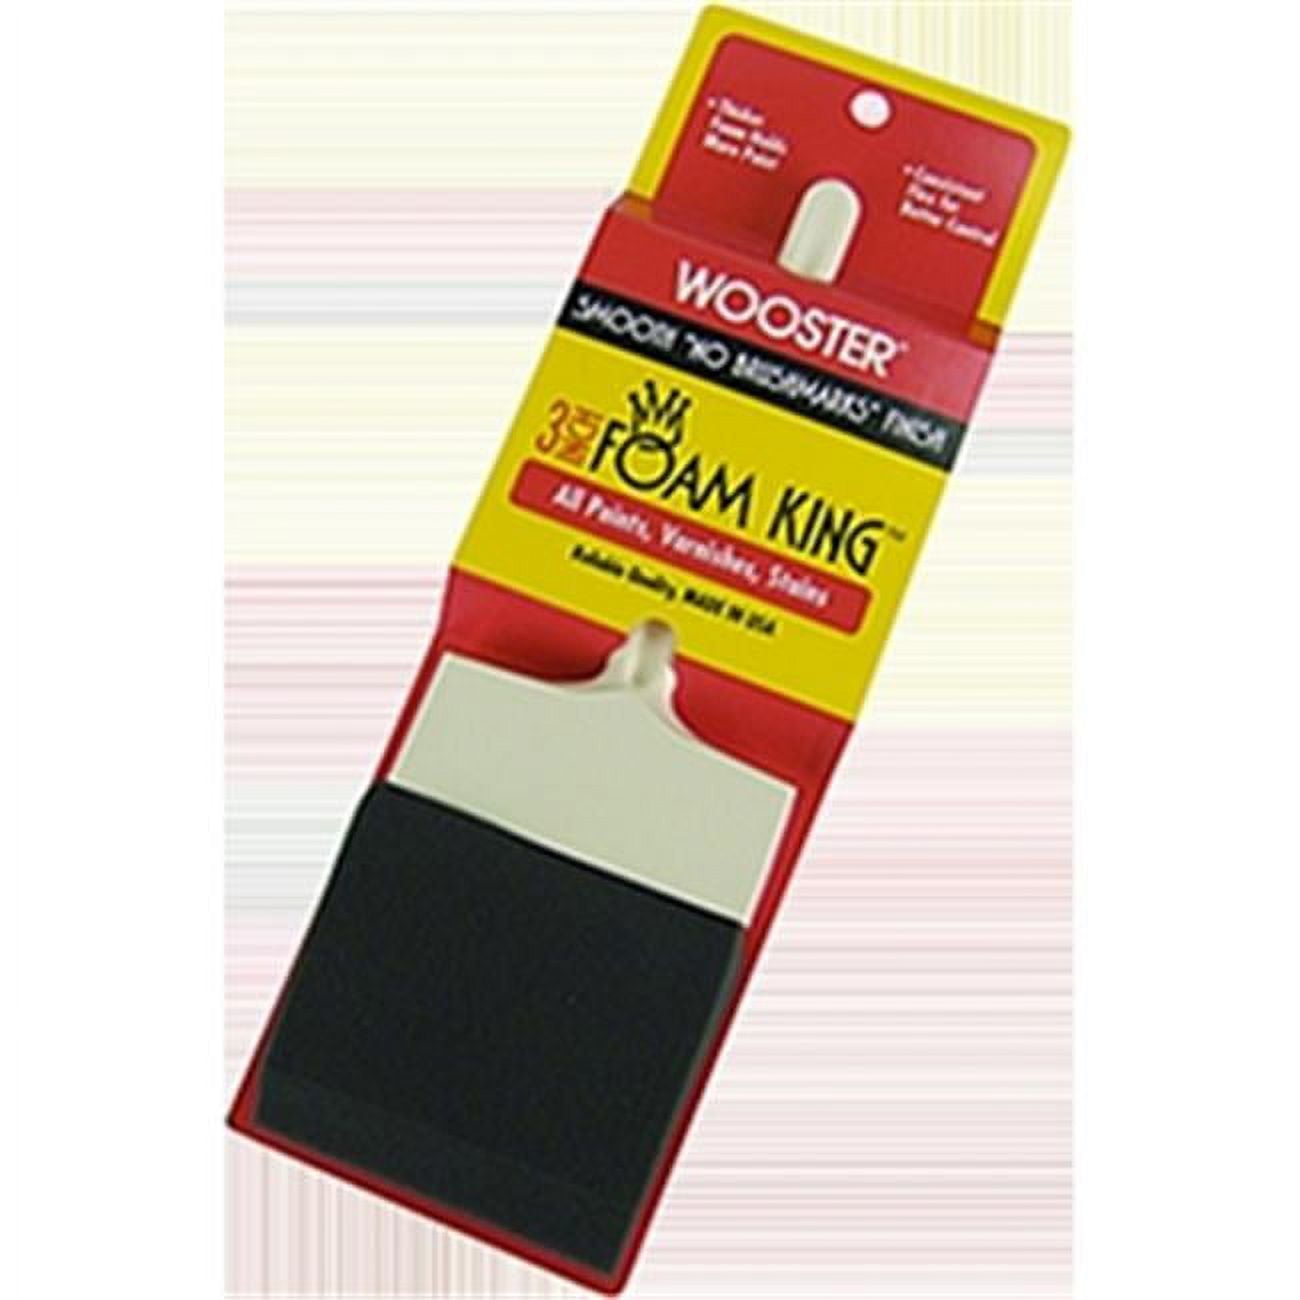 36‐Pack of 1‐1/2” Wooster 31030014 Foam King Paint Brush